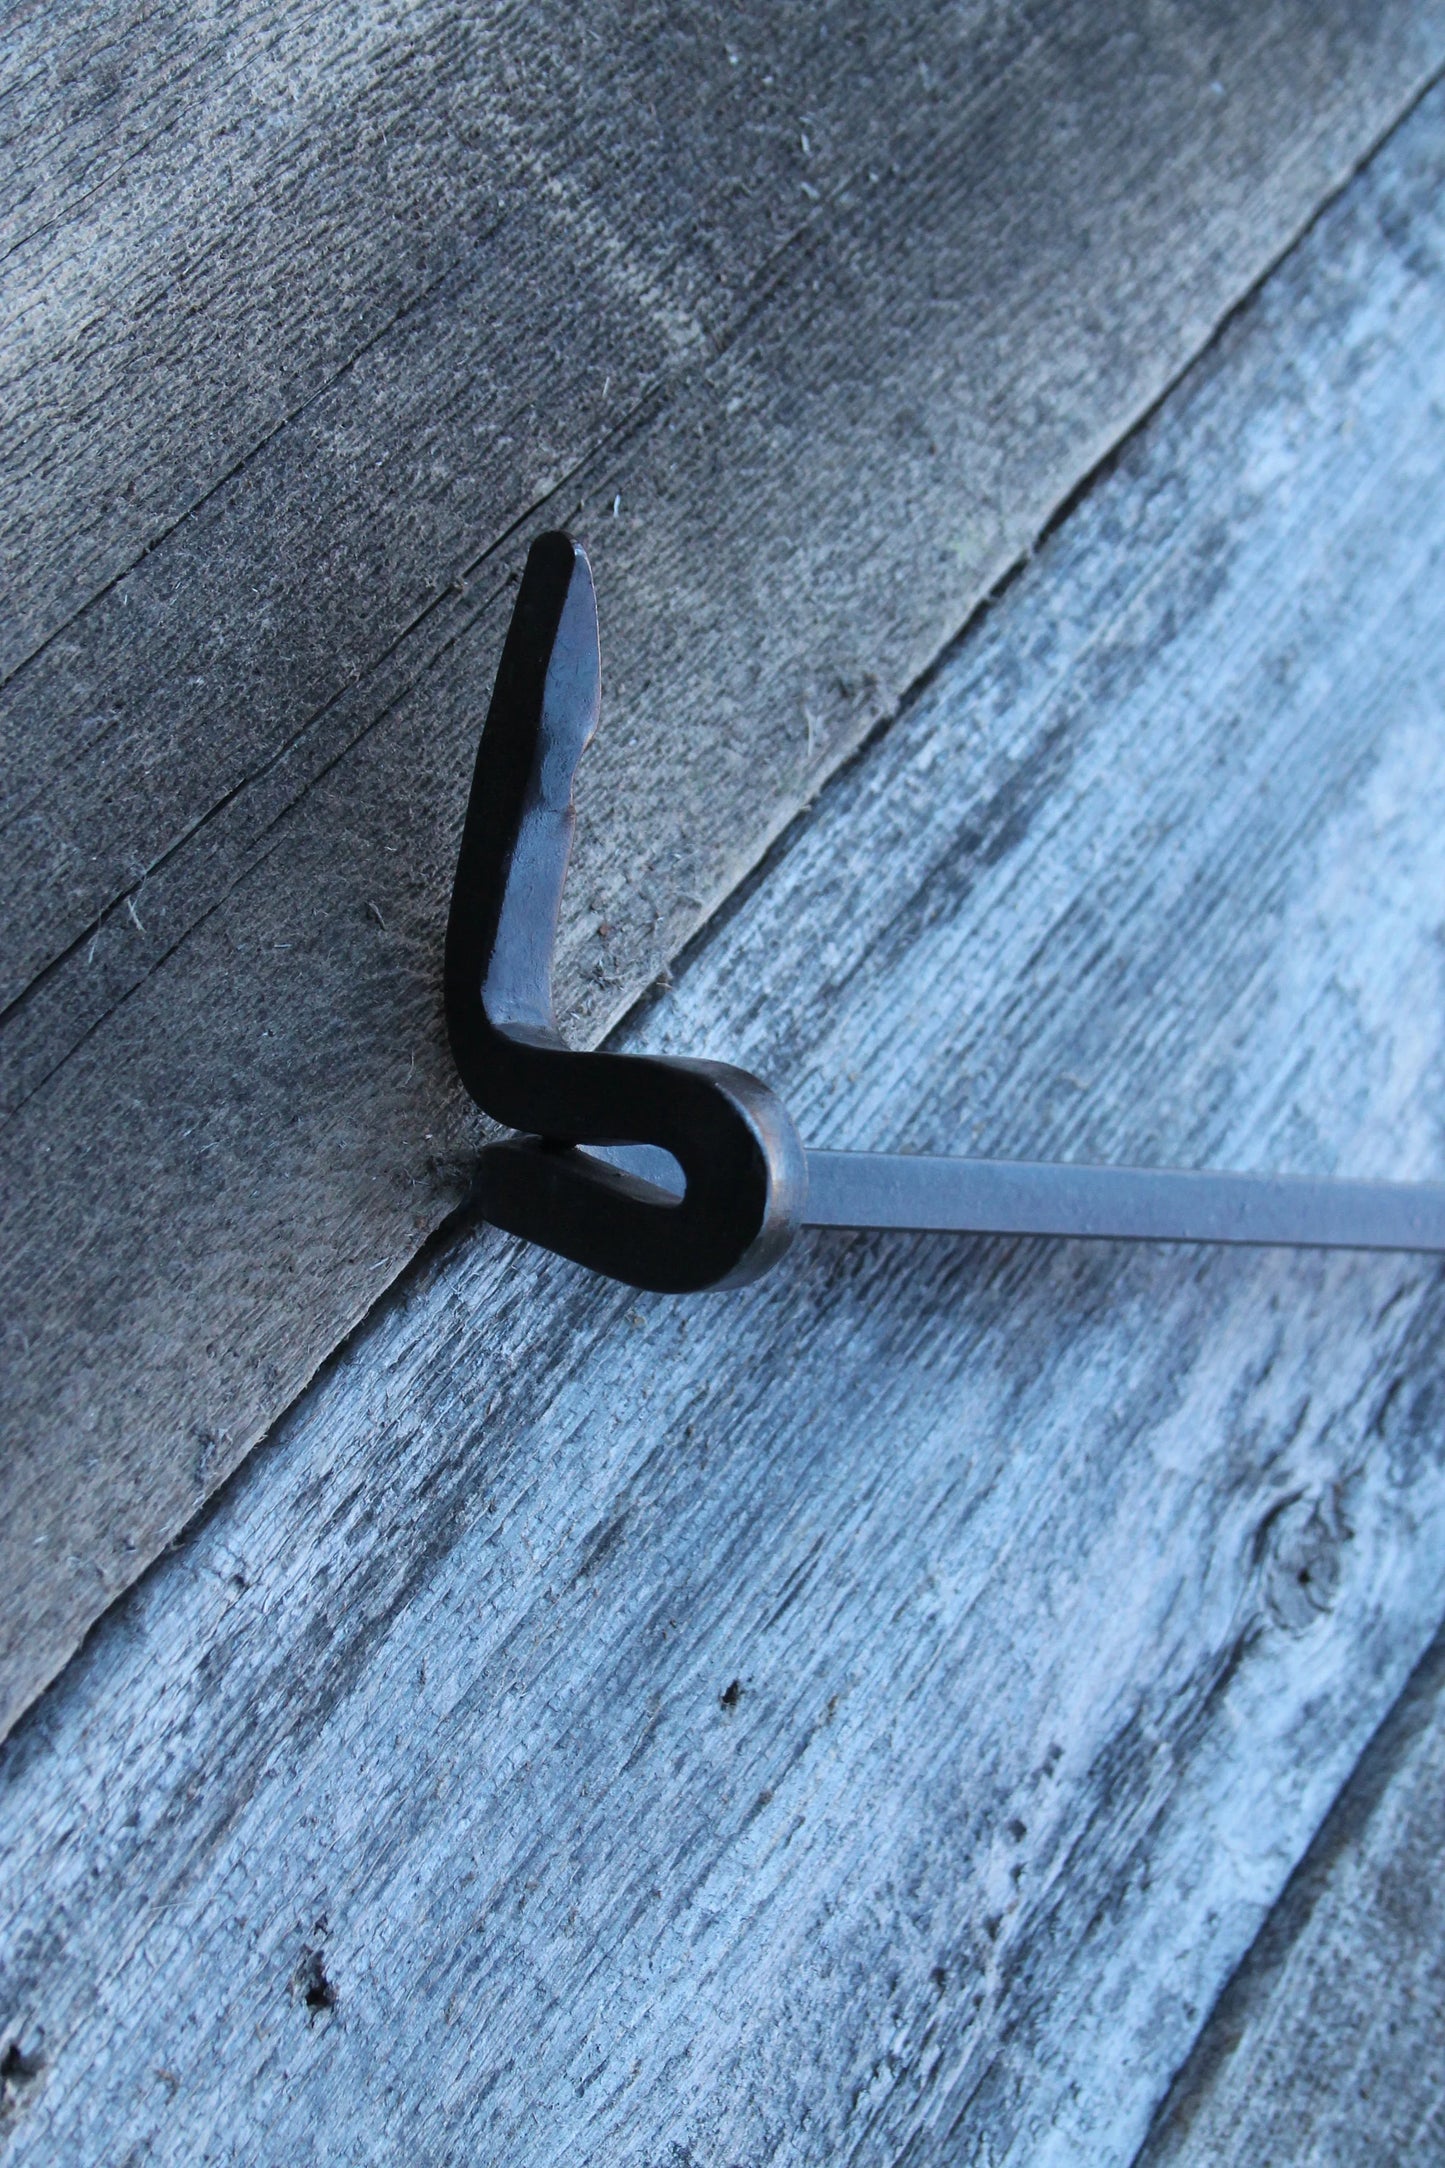 Lid Lifter Hand Forged For Dutch Oven - Handmade In USA